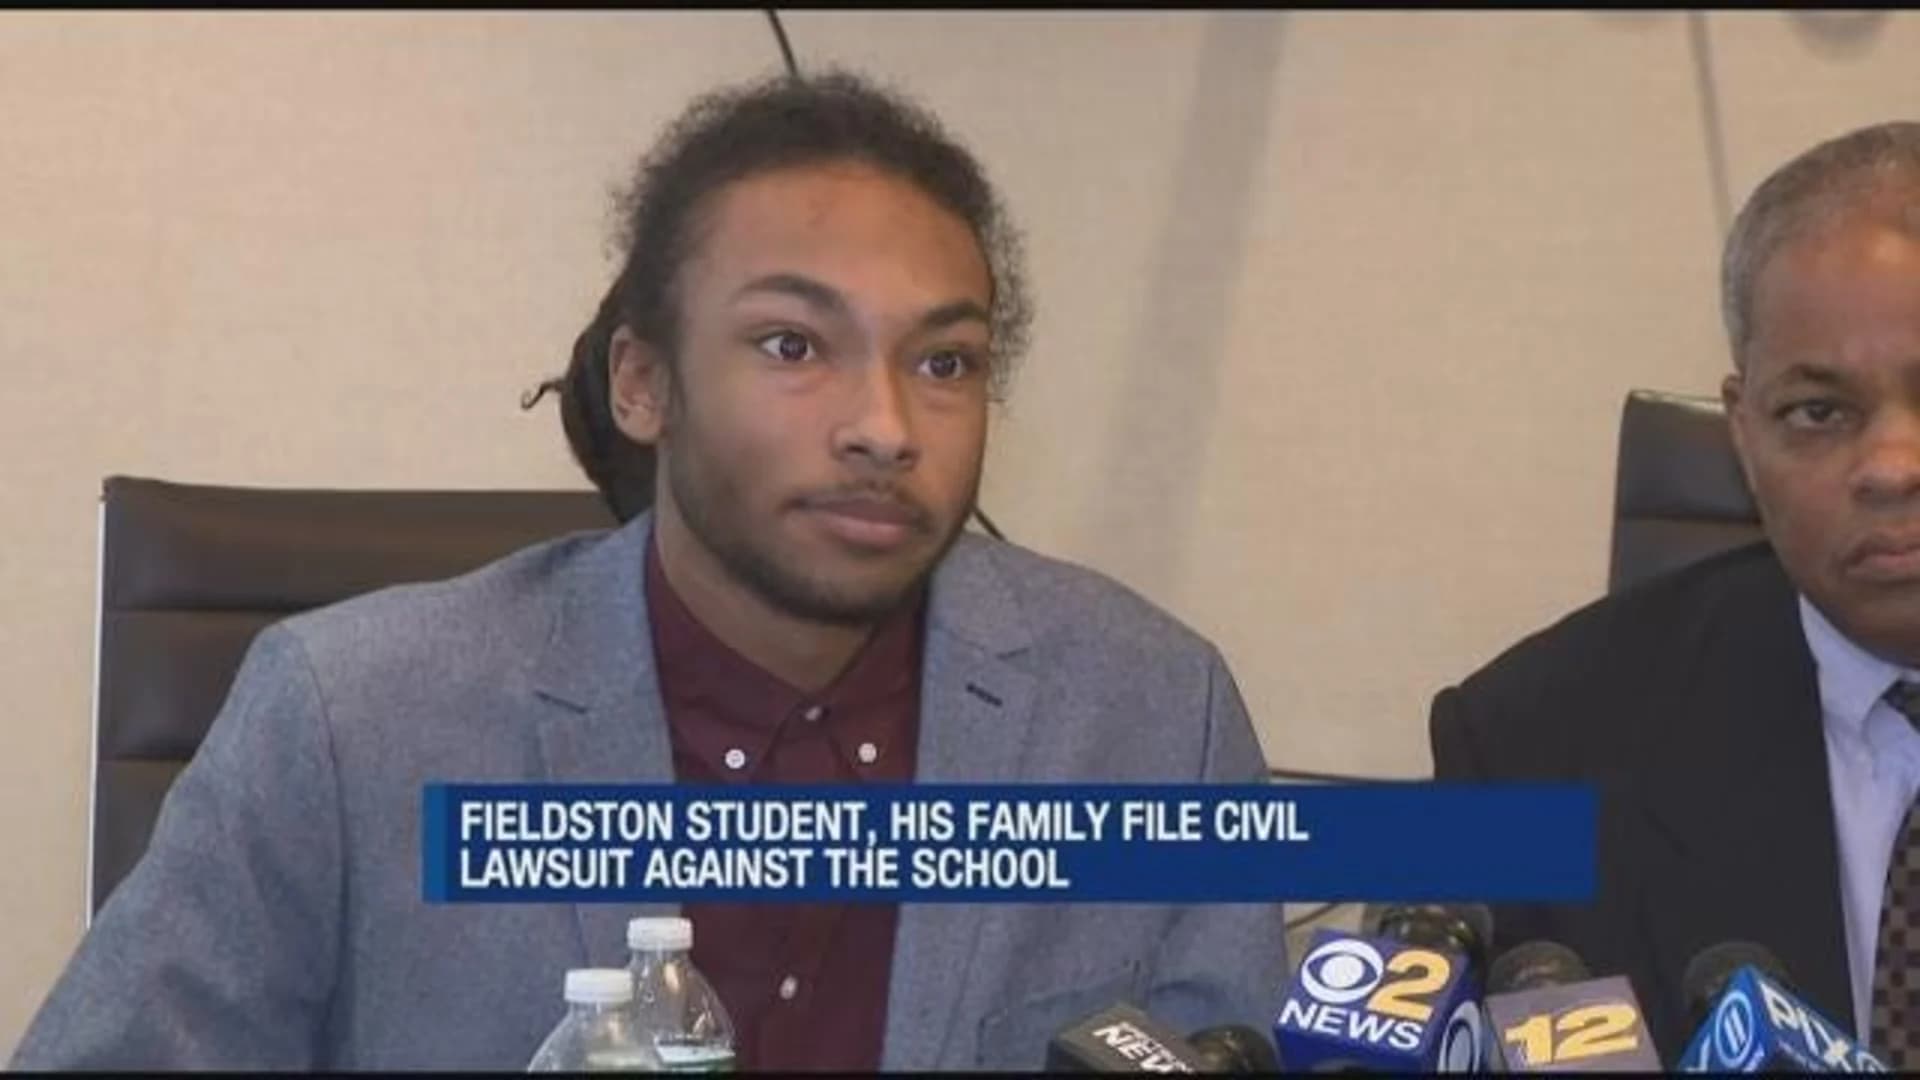 Family files suit against Fieldston School, calling for end to discriminatory practices